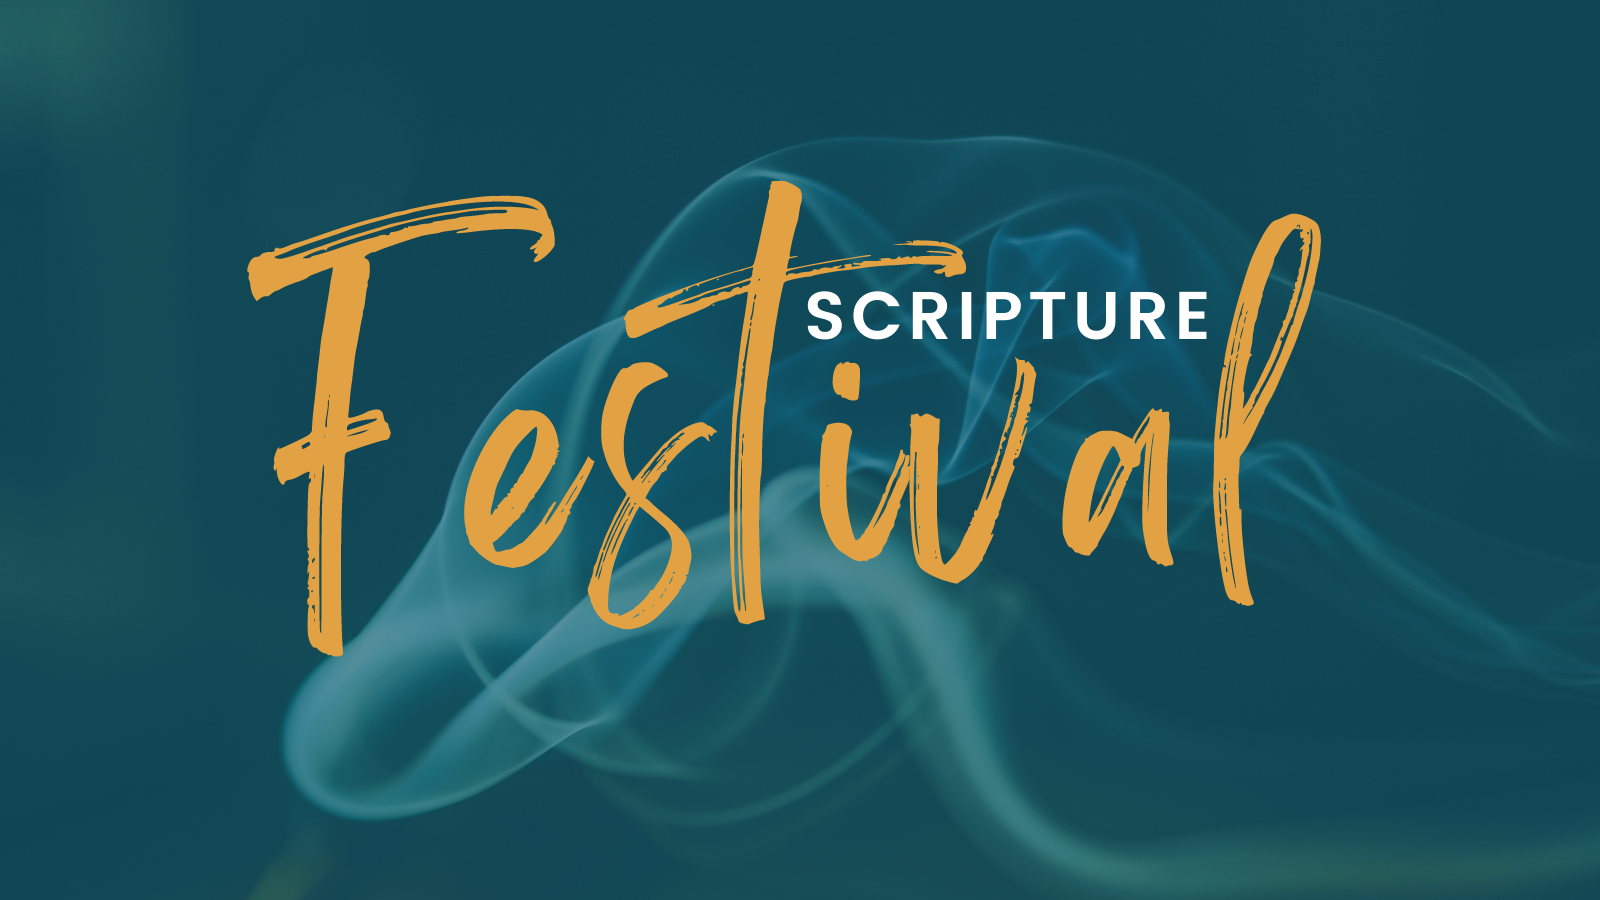 Scripture Festival - Diocese of Westminster